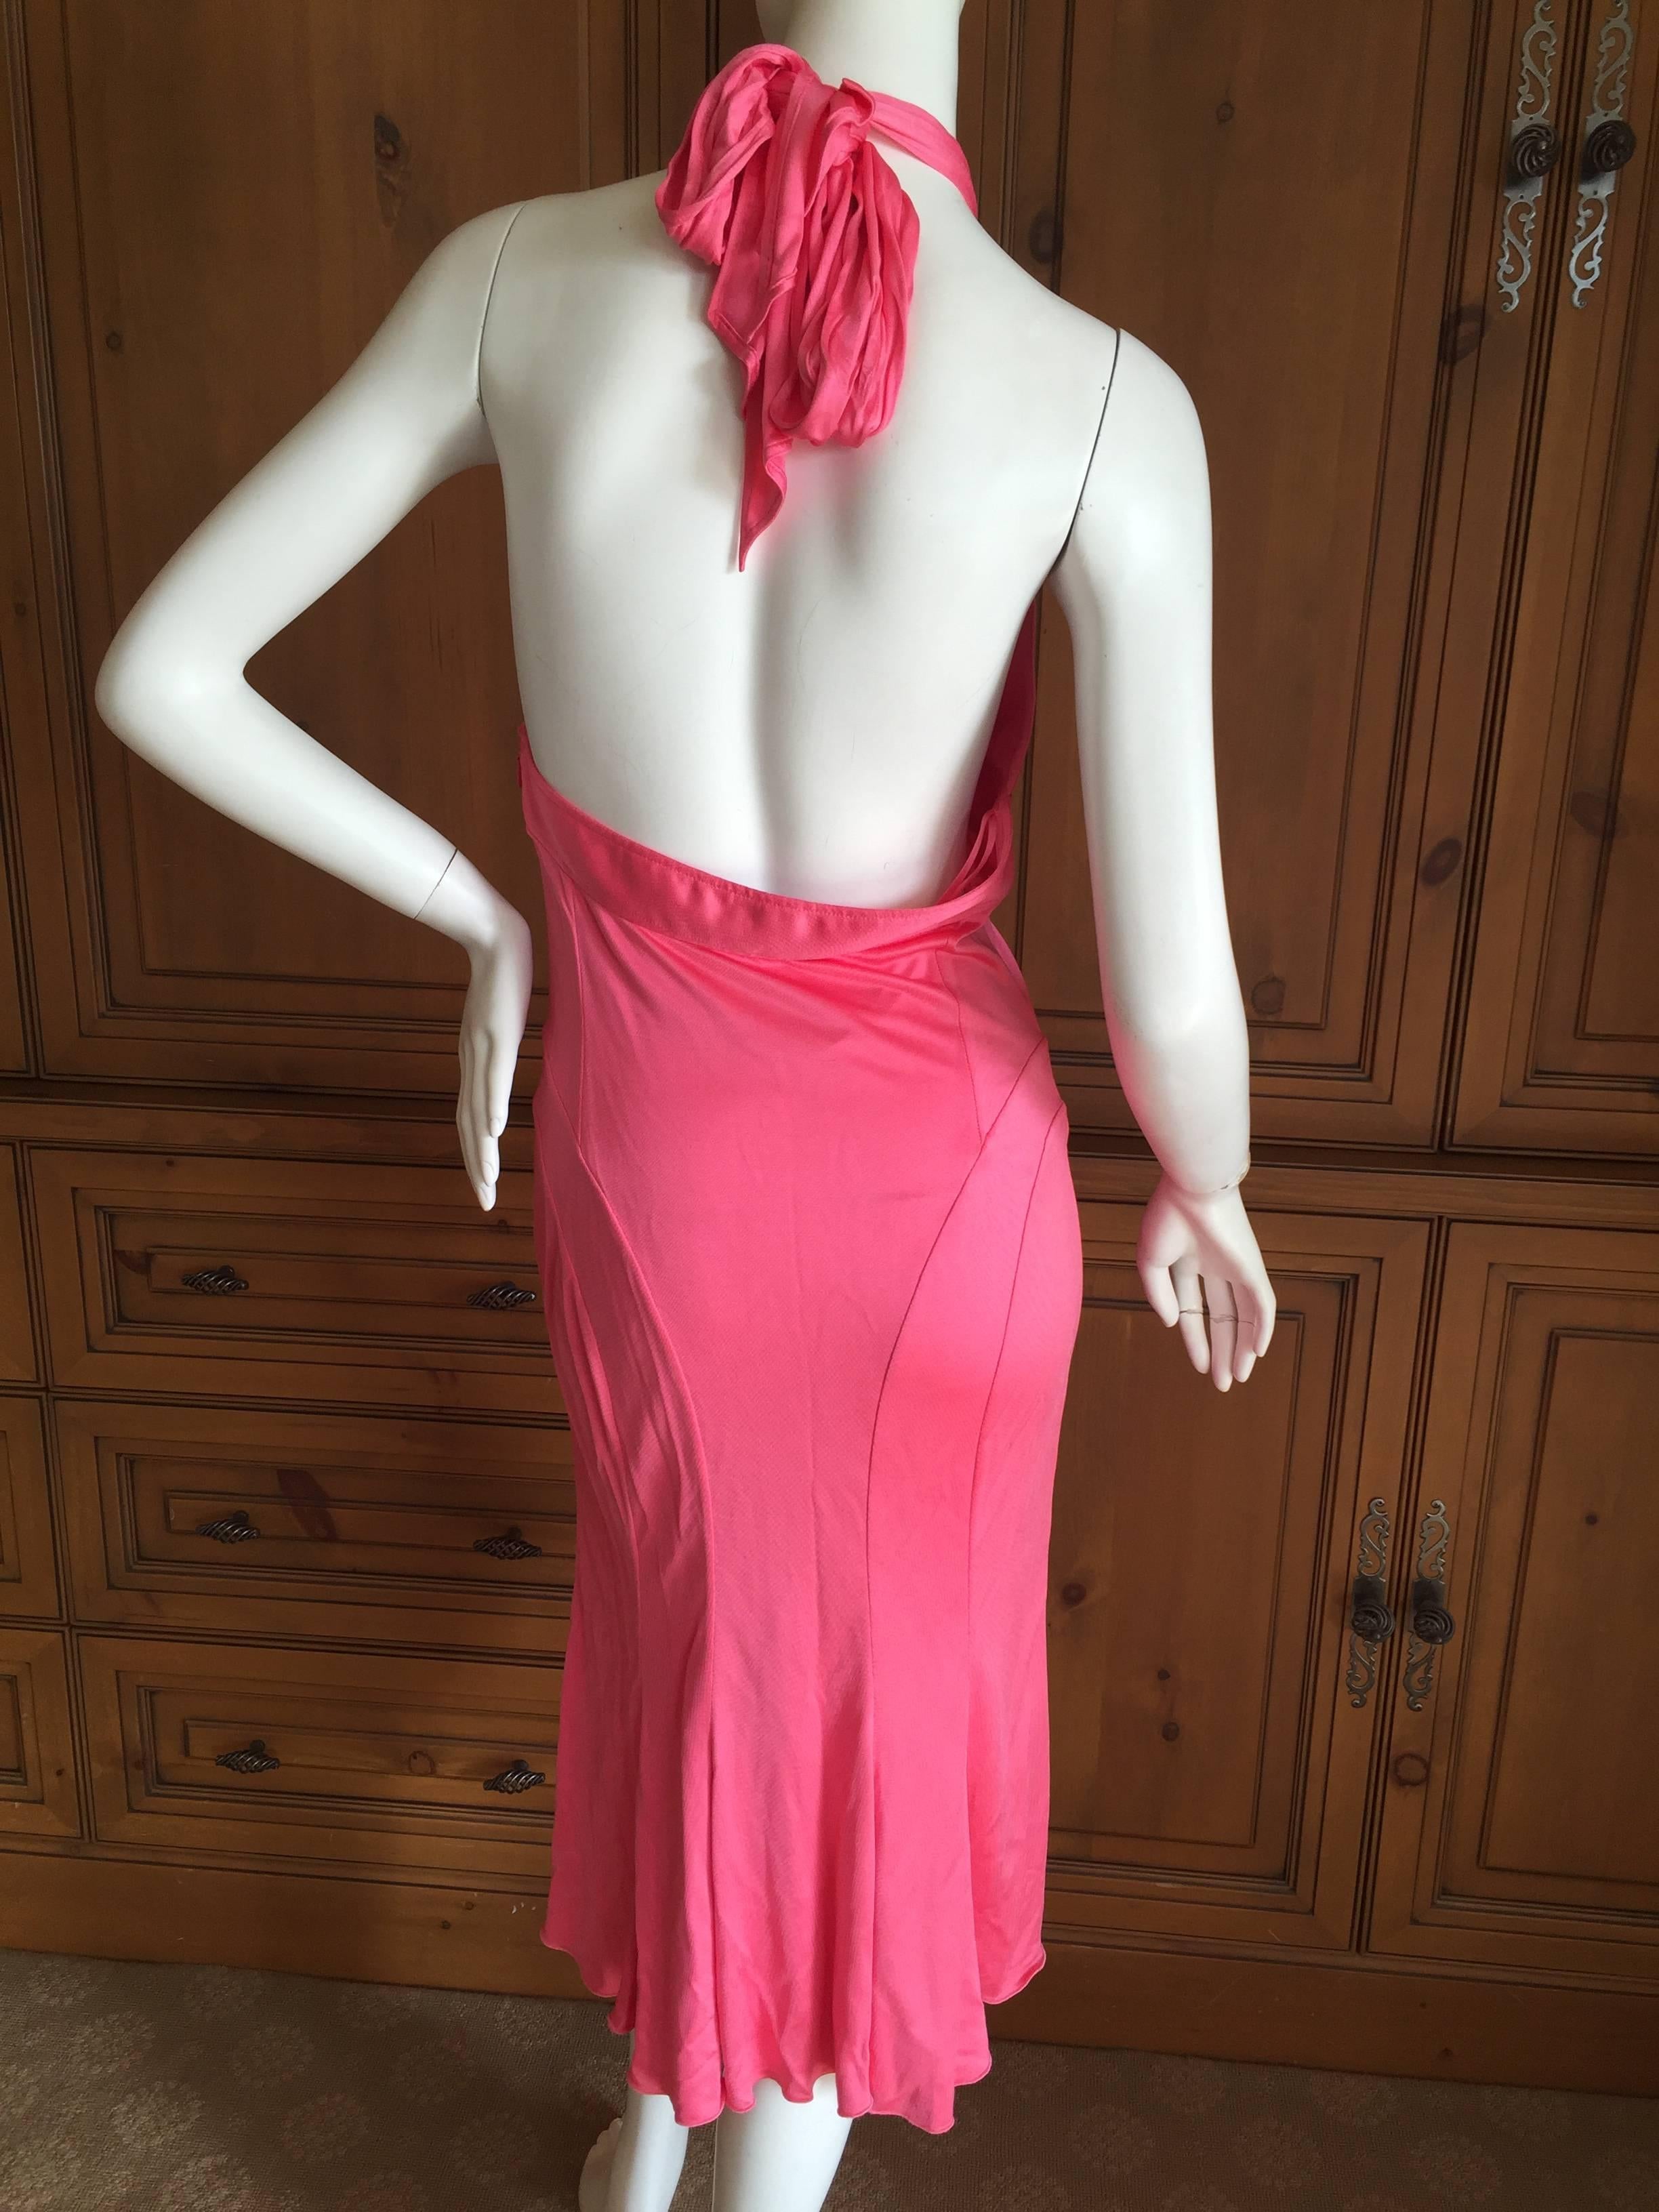 Versace Backless Pink Cocktail Dress with Large Gold Medusa Buckle 1